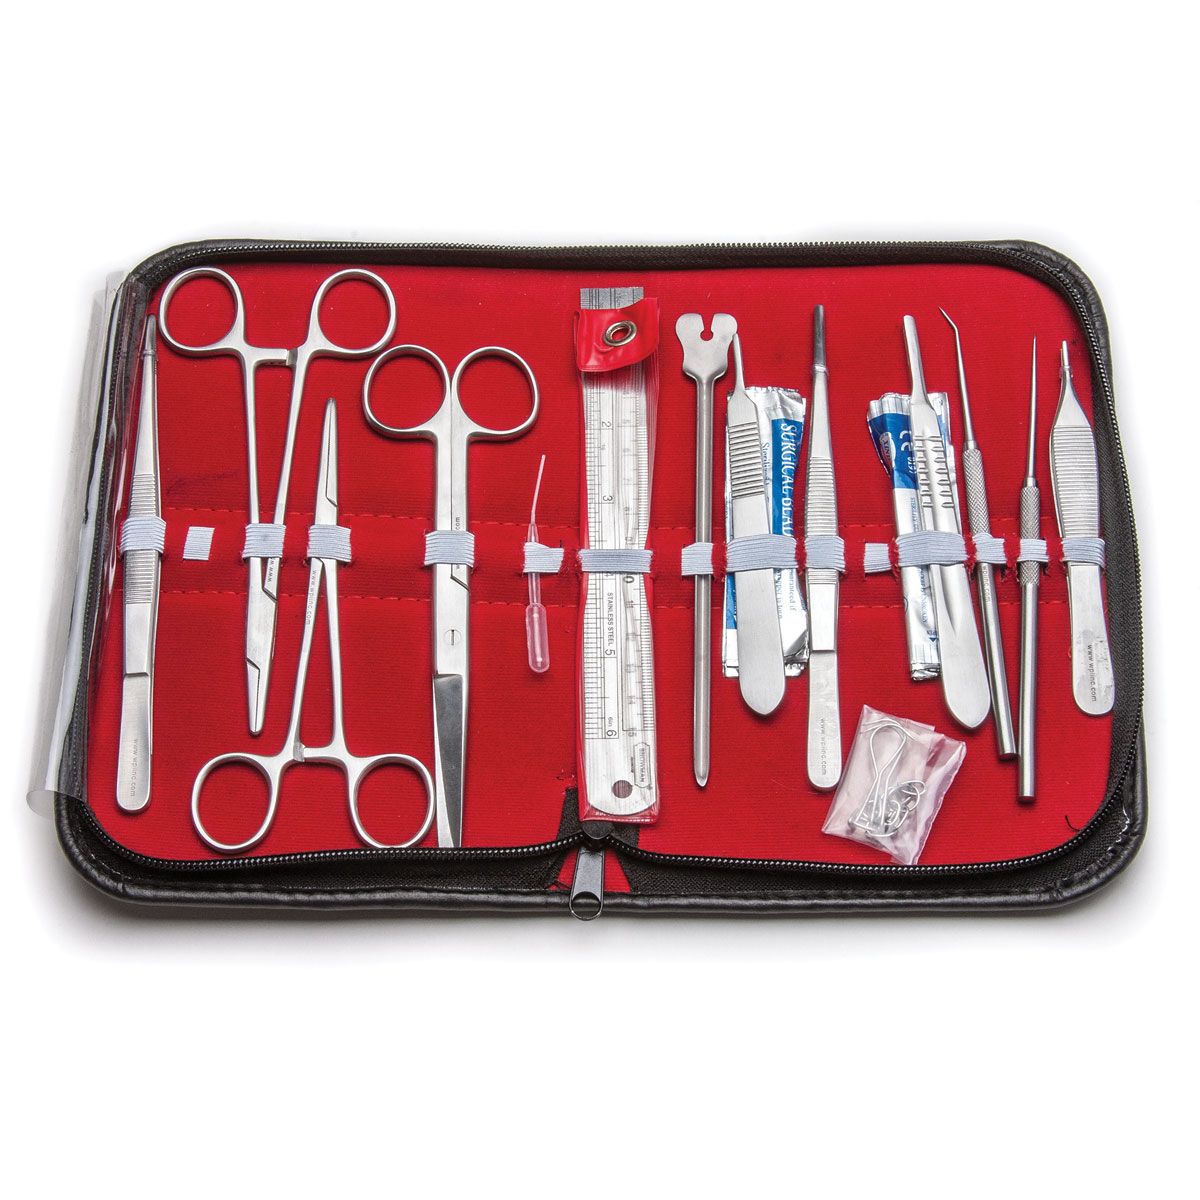 Animal Dissection Kit, Instrument Tools, Biological Tool